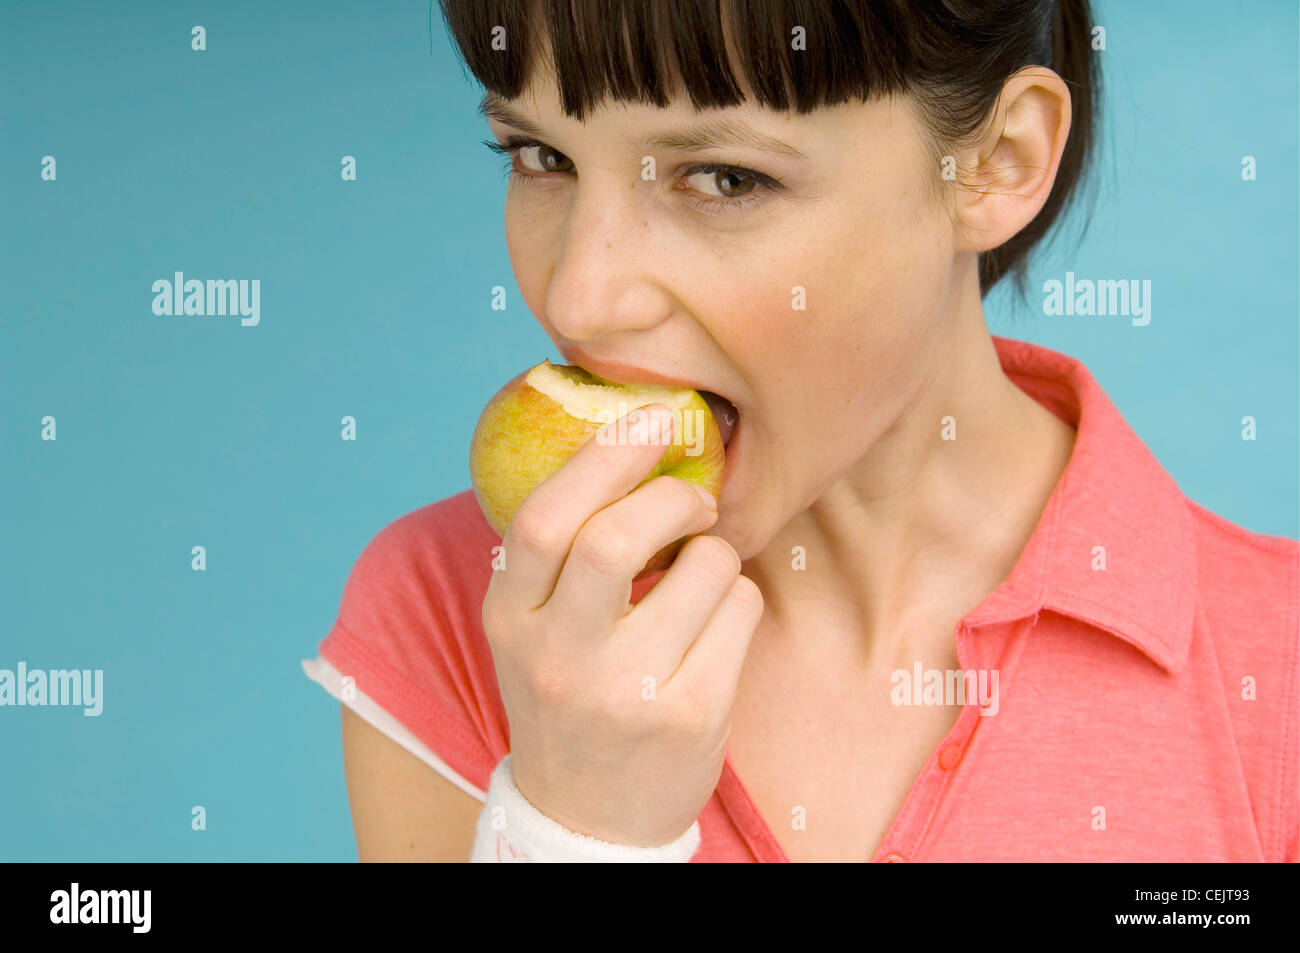 Female wearing red t shirt with open collar and white wristband taking bite from apple mouth open looking to camera  RBO Stock Photo